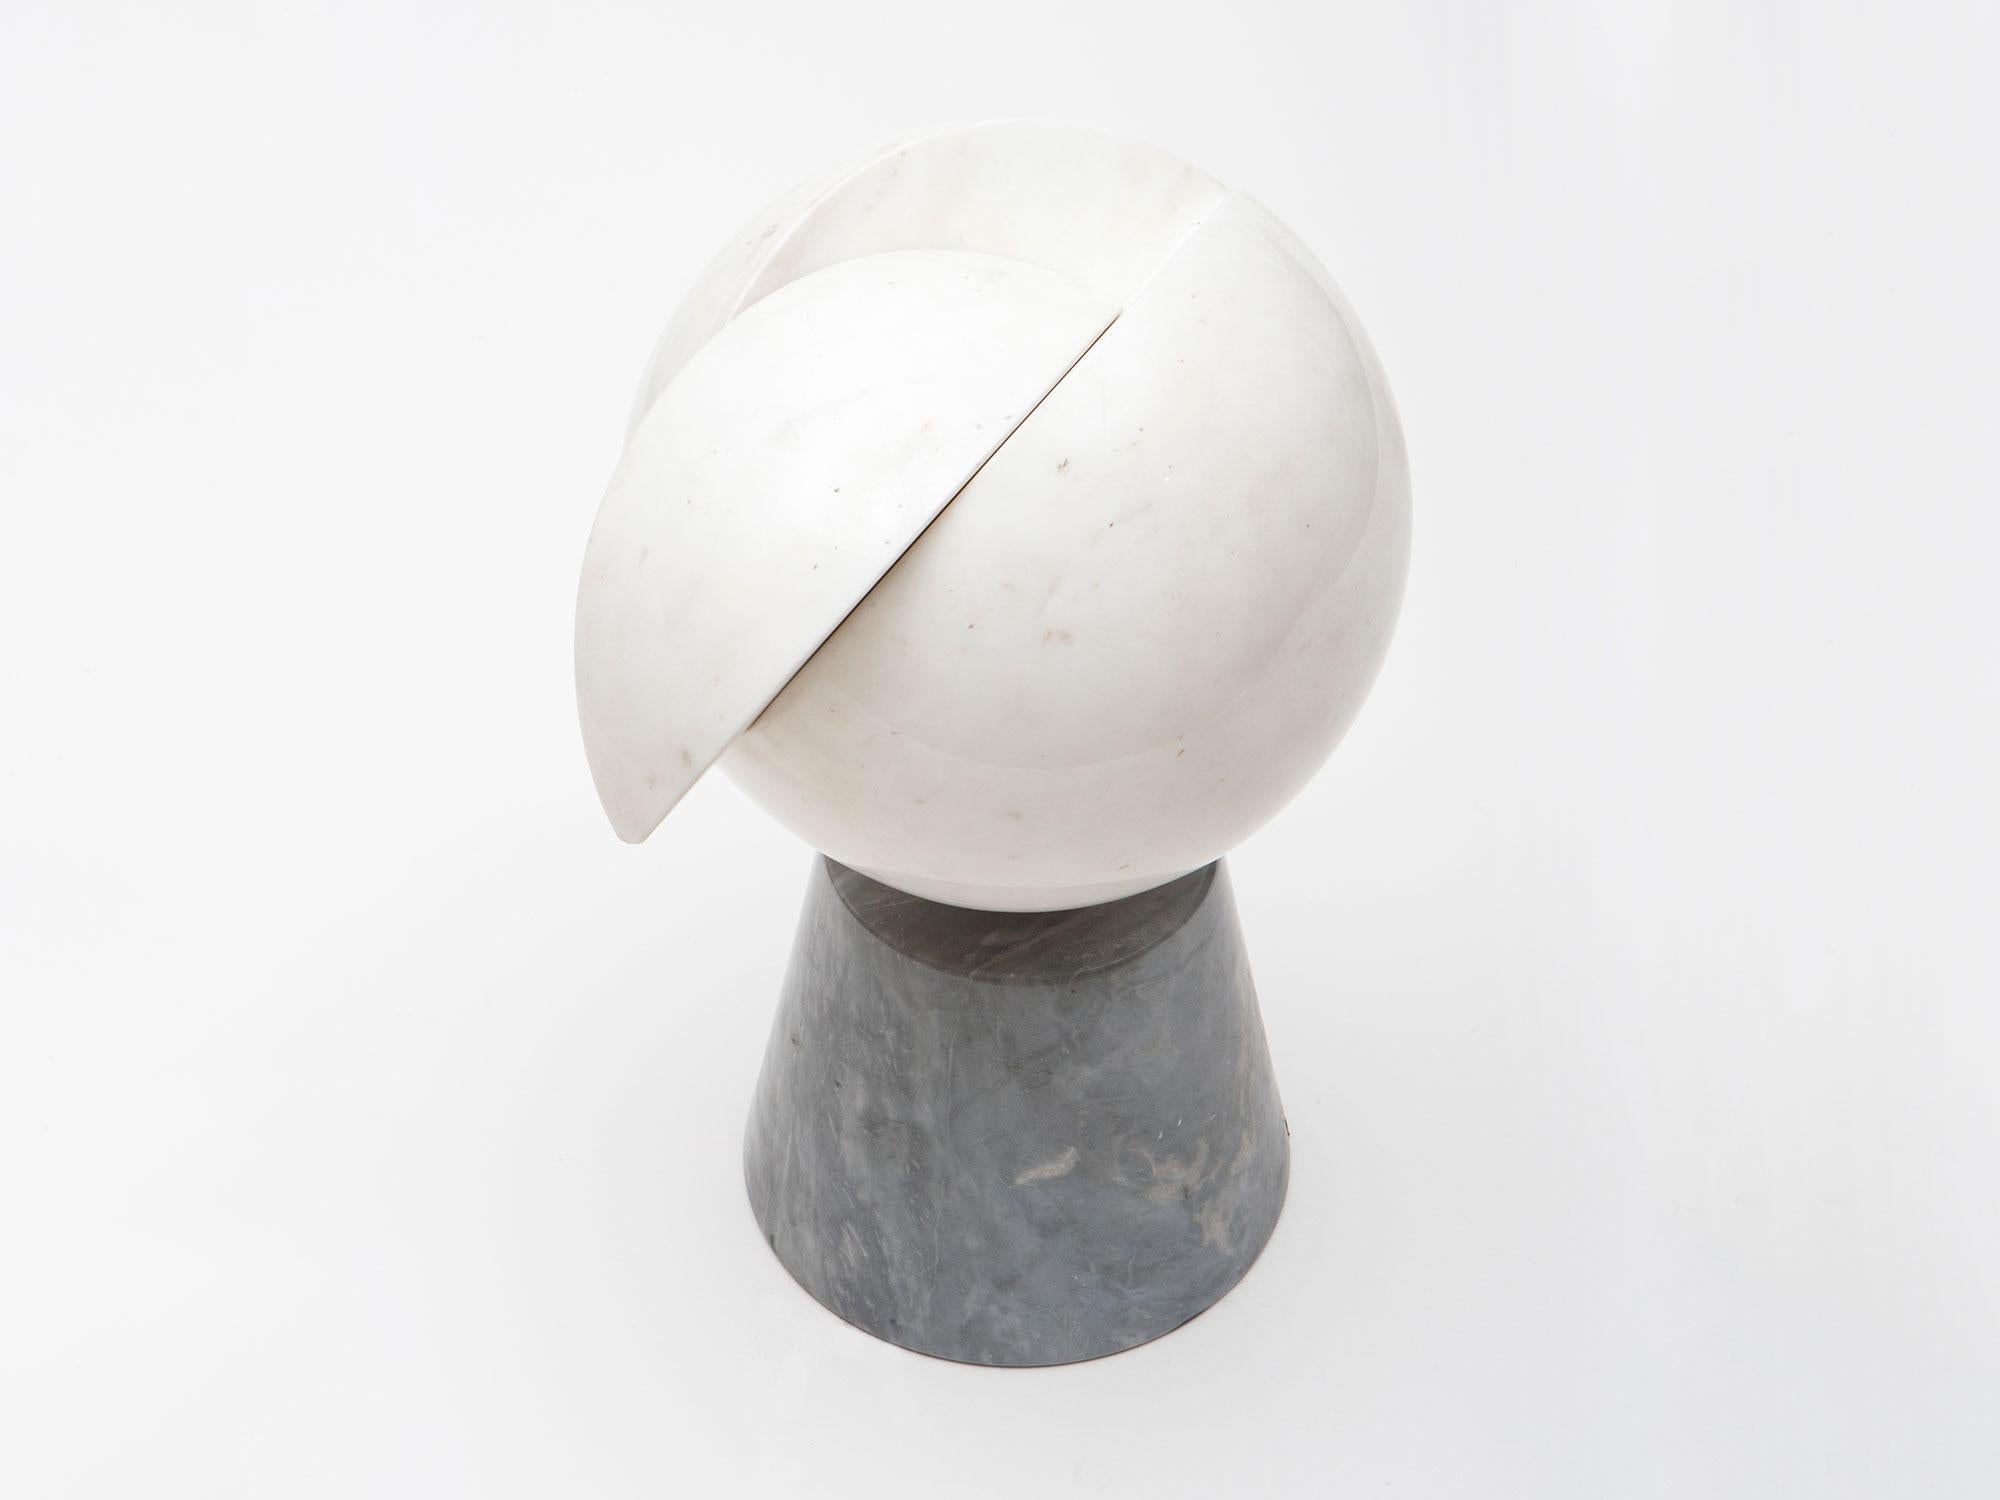 Carrara marble sculpture by Israeli-American artist Hanna Eshel (b. 1926). Hand carved in Carrara, Italy. Eshel is a multi-disciplinary artist best known for her work in carved marble, a skill she honed from 1972-1978 while living and practicing in